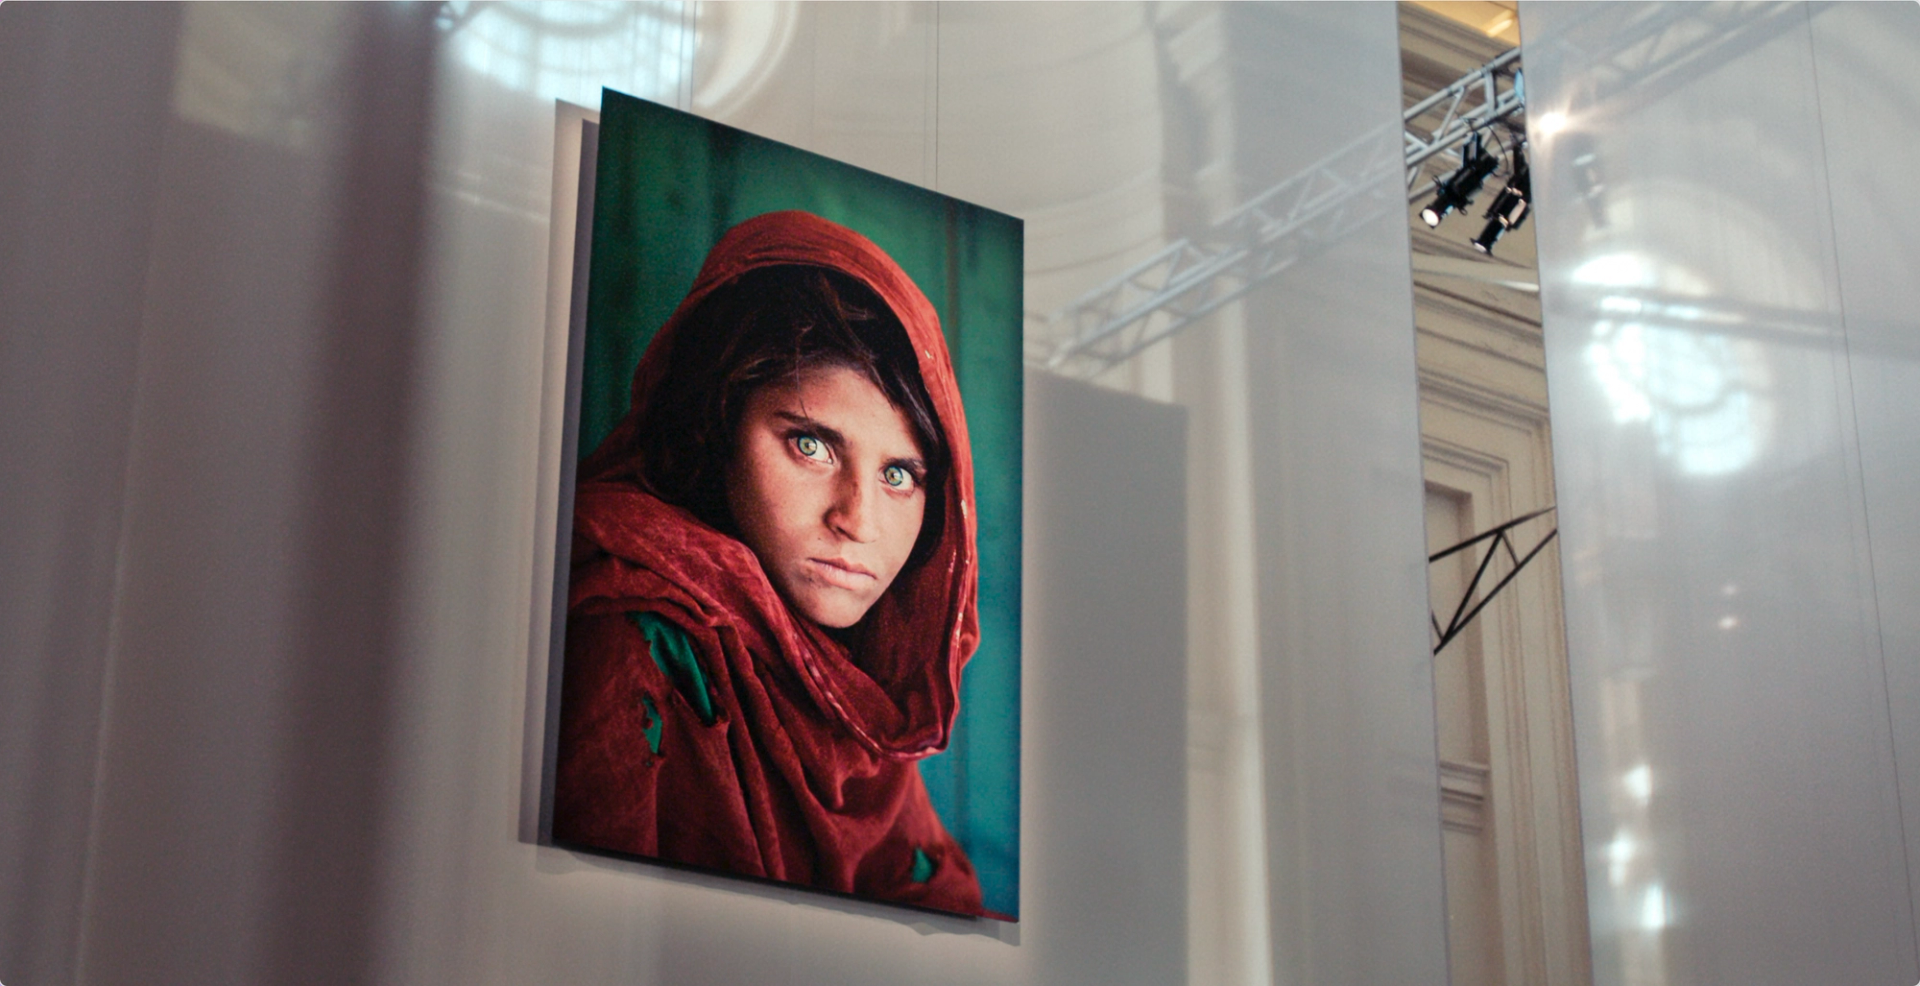 Steve McCurry - Artworks for Sale & More